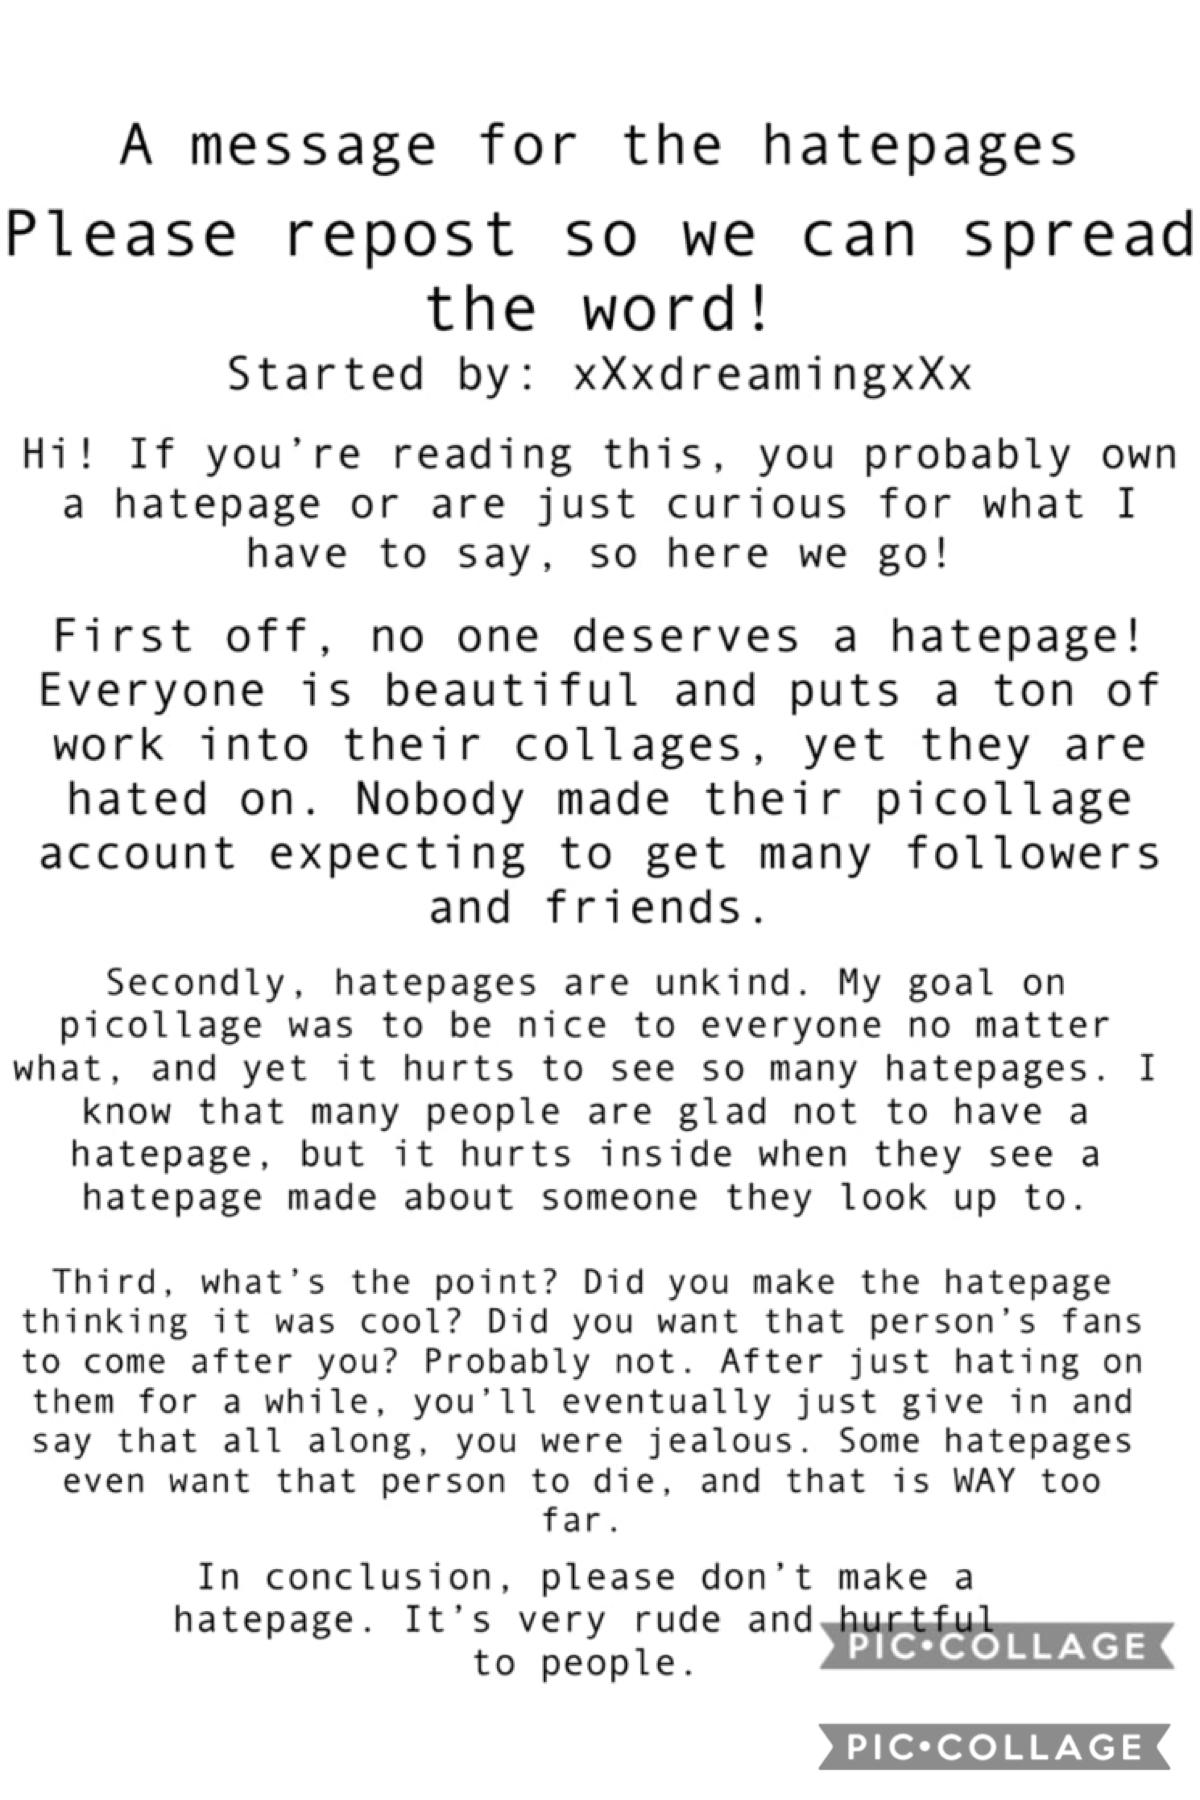 Please repost this on your account and spread the word. Also, we can’t have more hatepages!